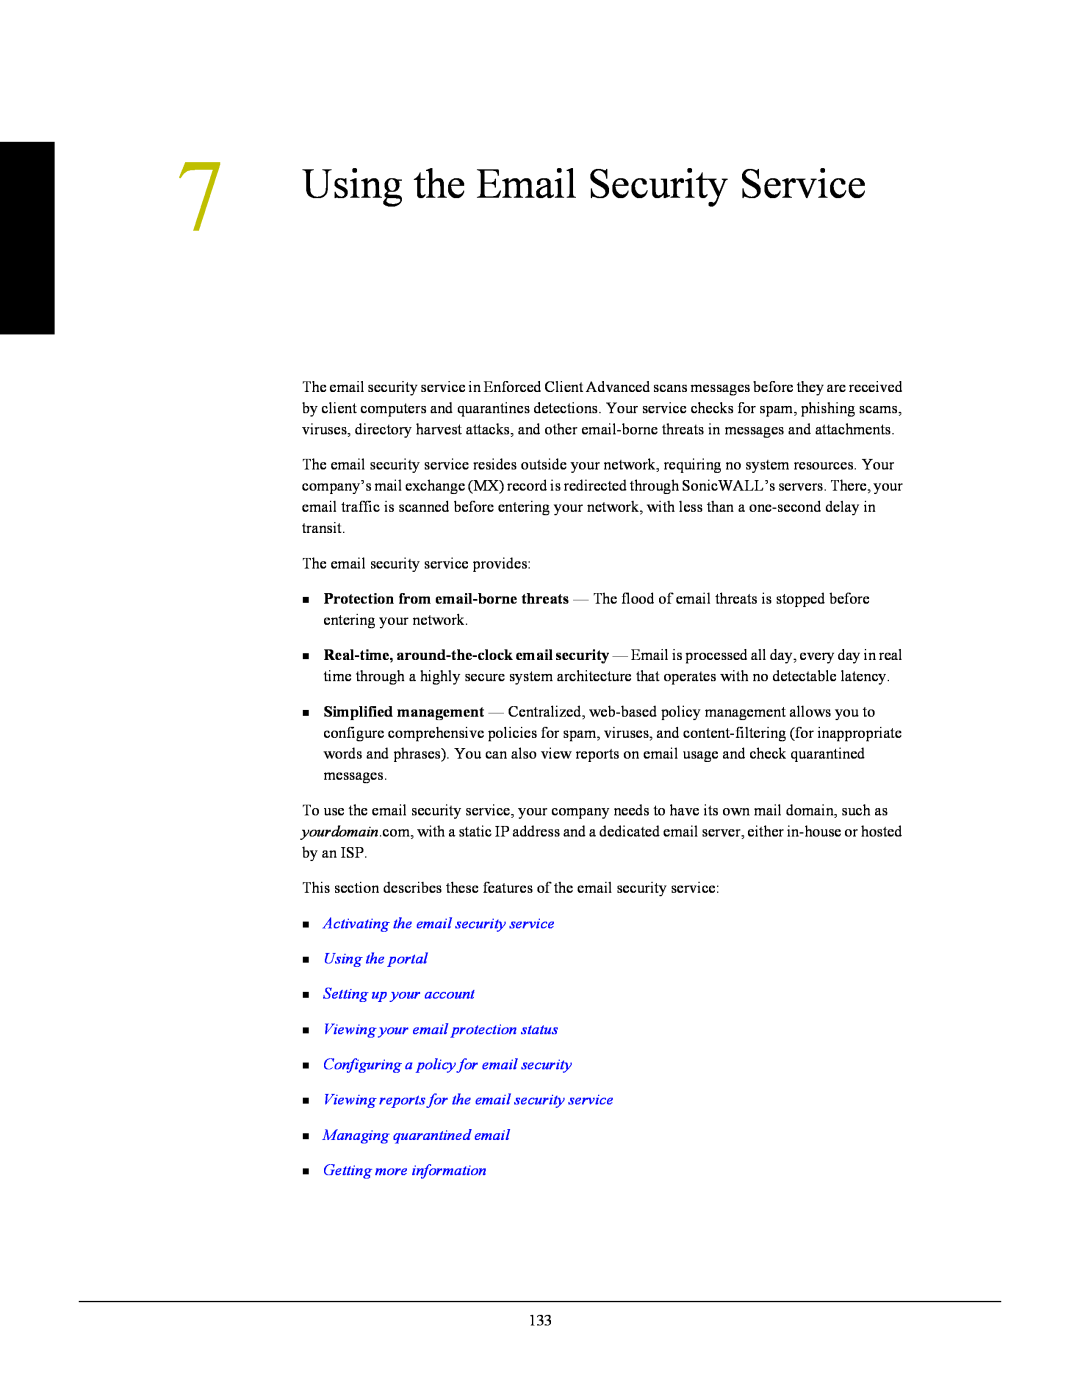 SonicWALL 4.5 manual Using the Email Security Service, „ Activating the email security service „ Using the portal 